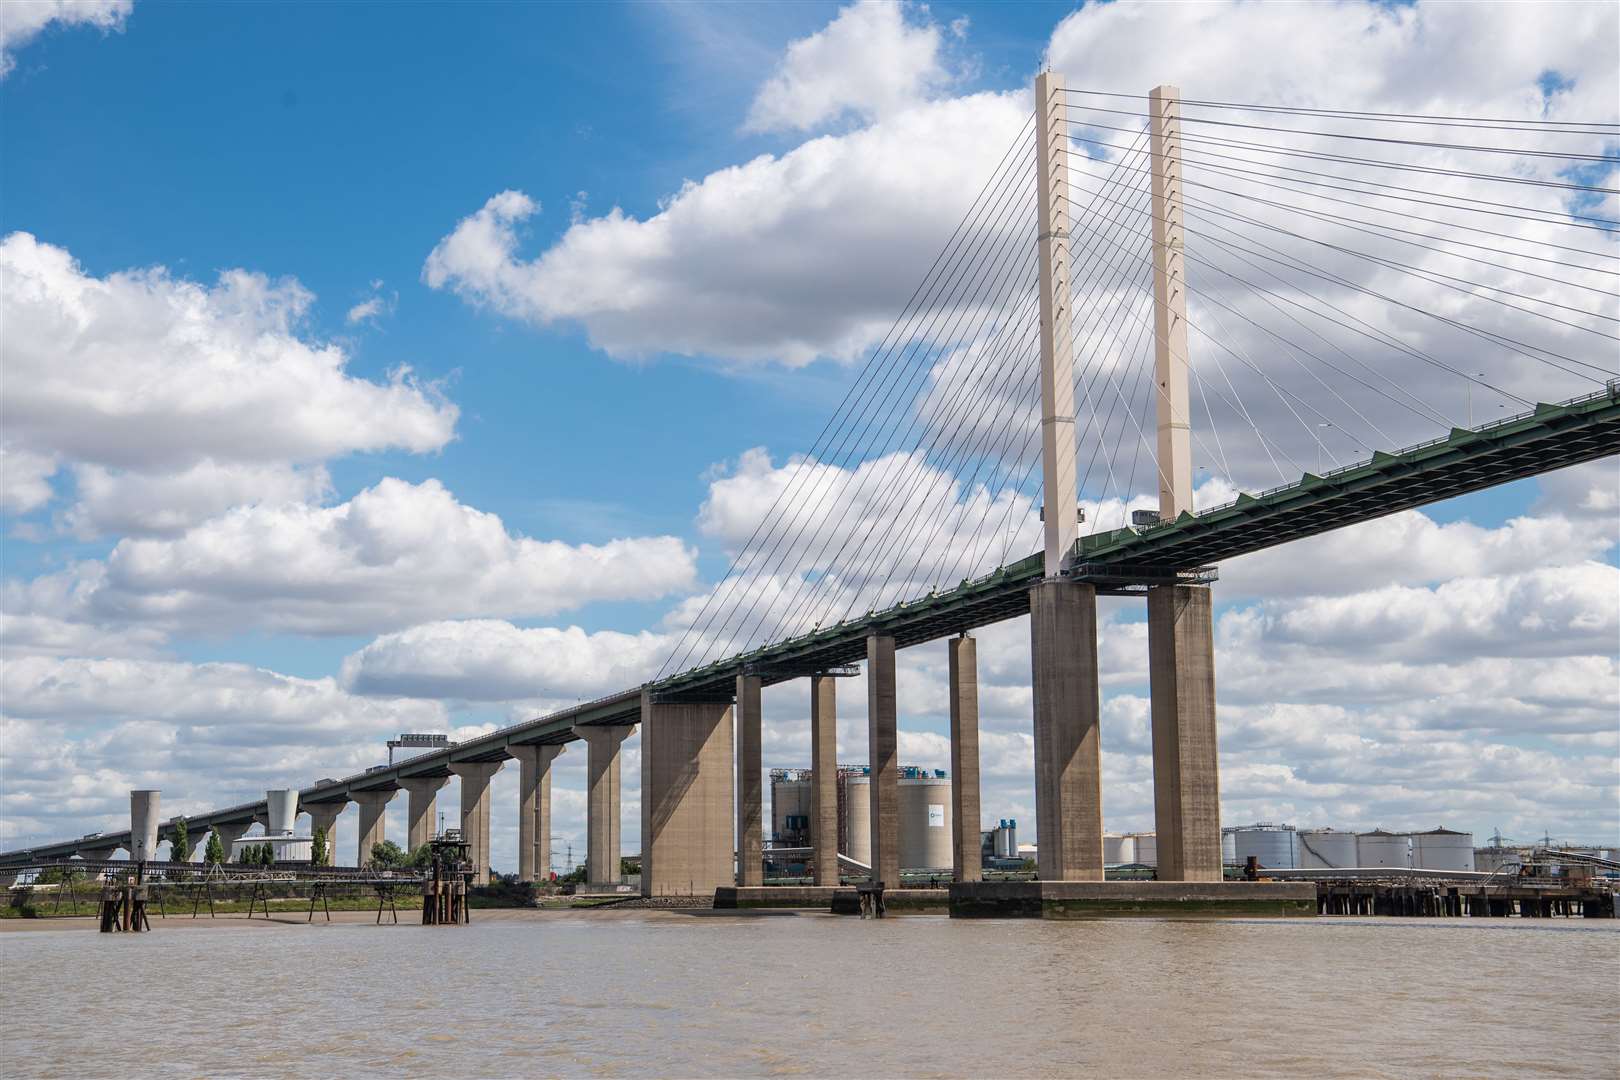 Safety measures have been brought in on the Dartford bridge